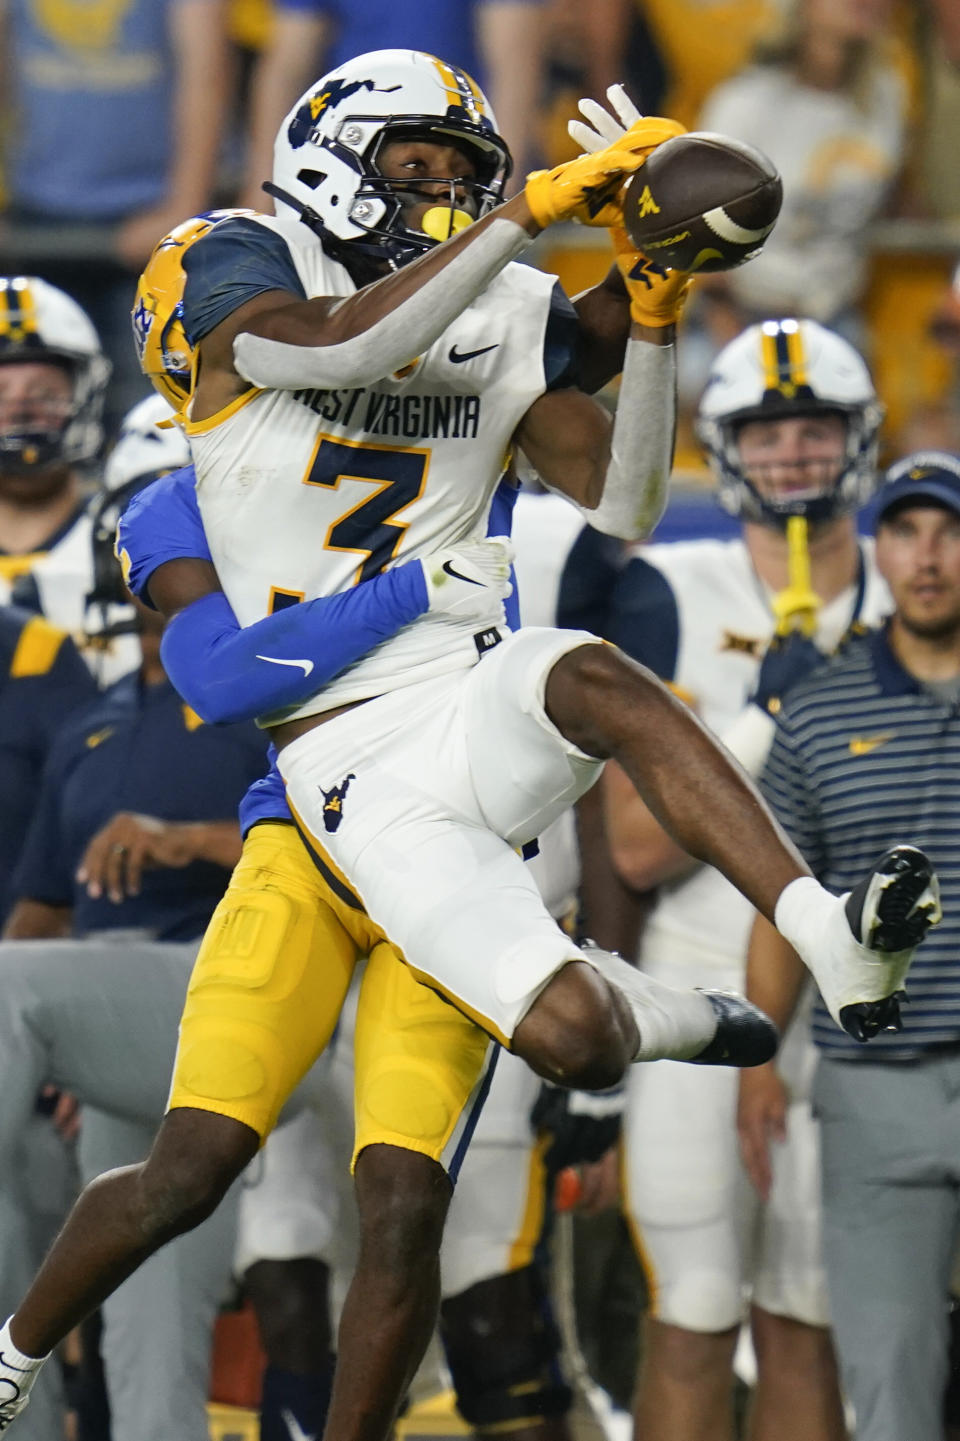 West Virginia wide receiver Kaden Prather (3) catches a pass for a first down against Pittsburgh defensive back M.J. Devonshire (12) during the first half of an NCAA college football game Thursday, Sept. 1, 2022, in Pittsburgh. (AP Photo/Keith Srakocic)